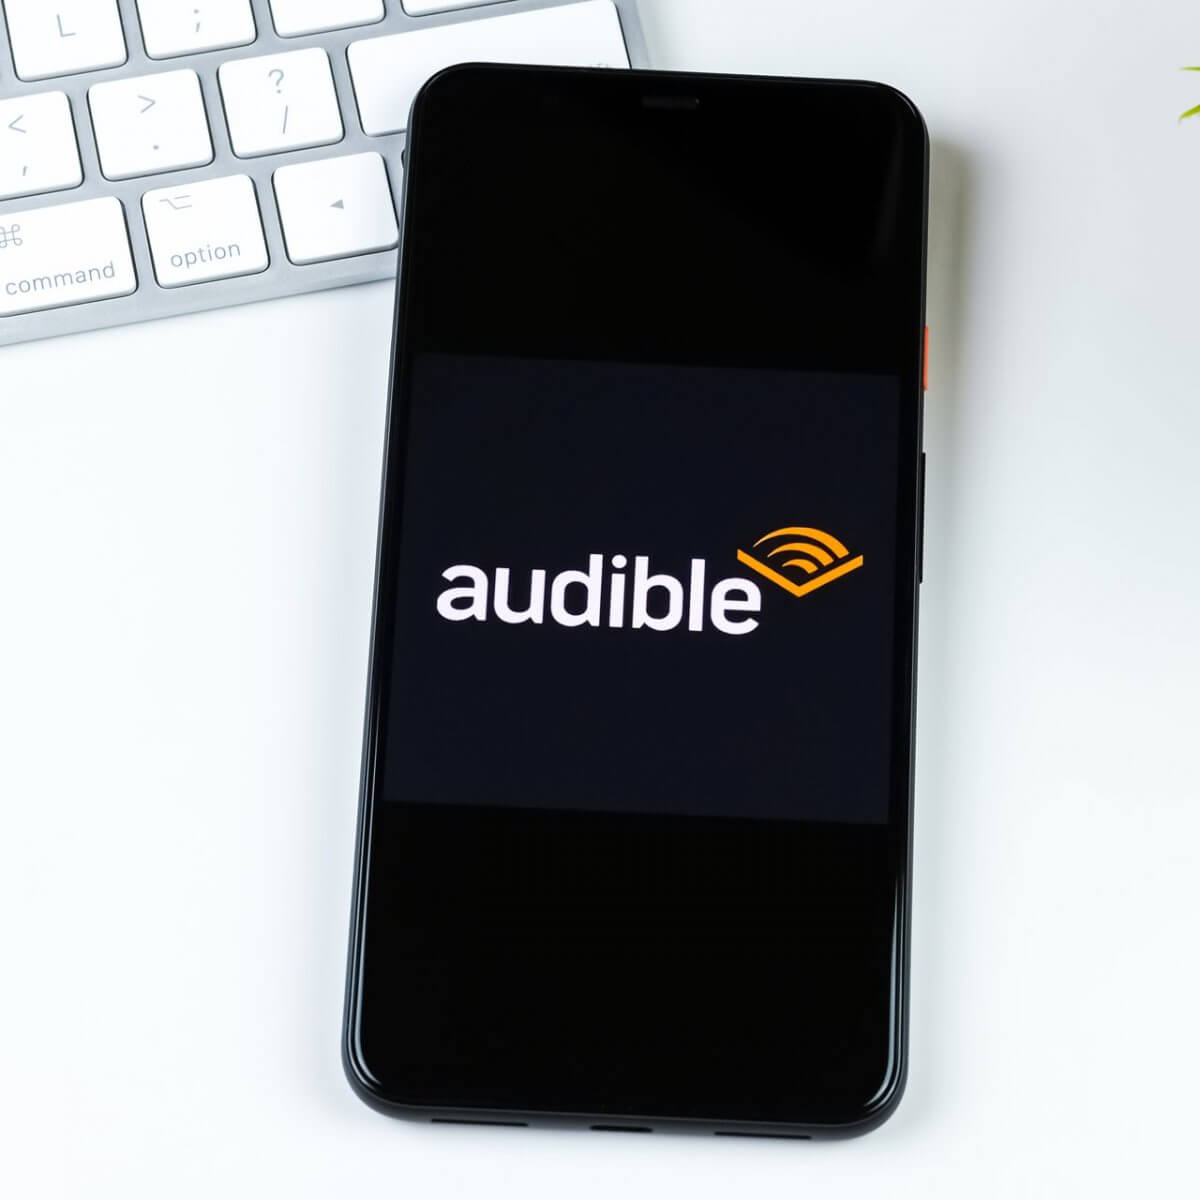 44 Top Images Amazon Audible App For Mac - How To Listen To Audible Audiobooks With The Apple Books App Audible Help